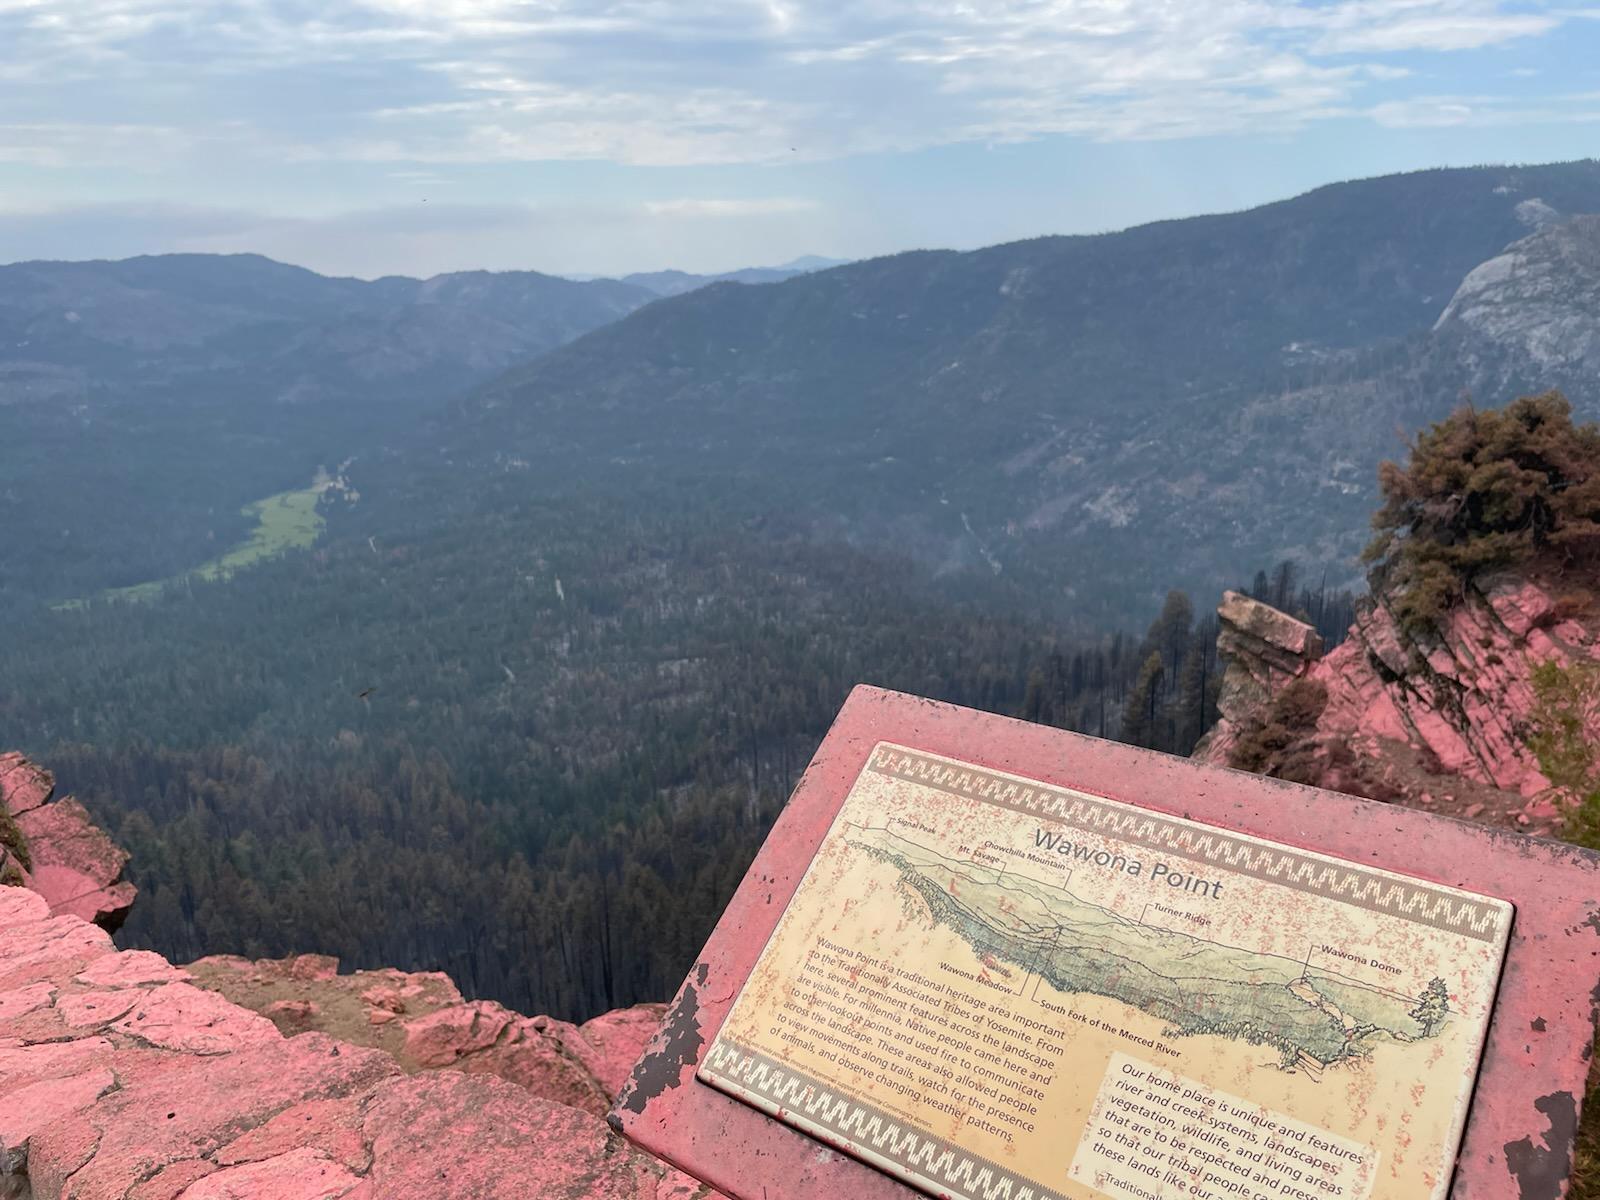 This image shows an interpretive sign located at Wawona Point which has been covered in pink from ffire retardant used to slow the spread of the fire